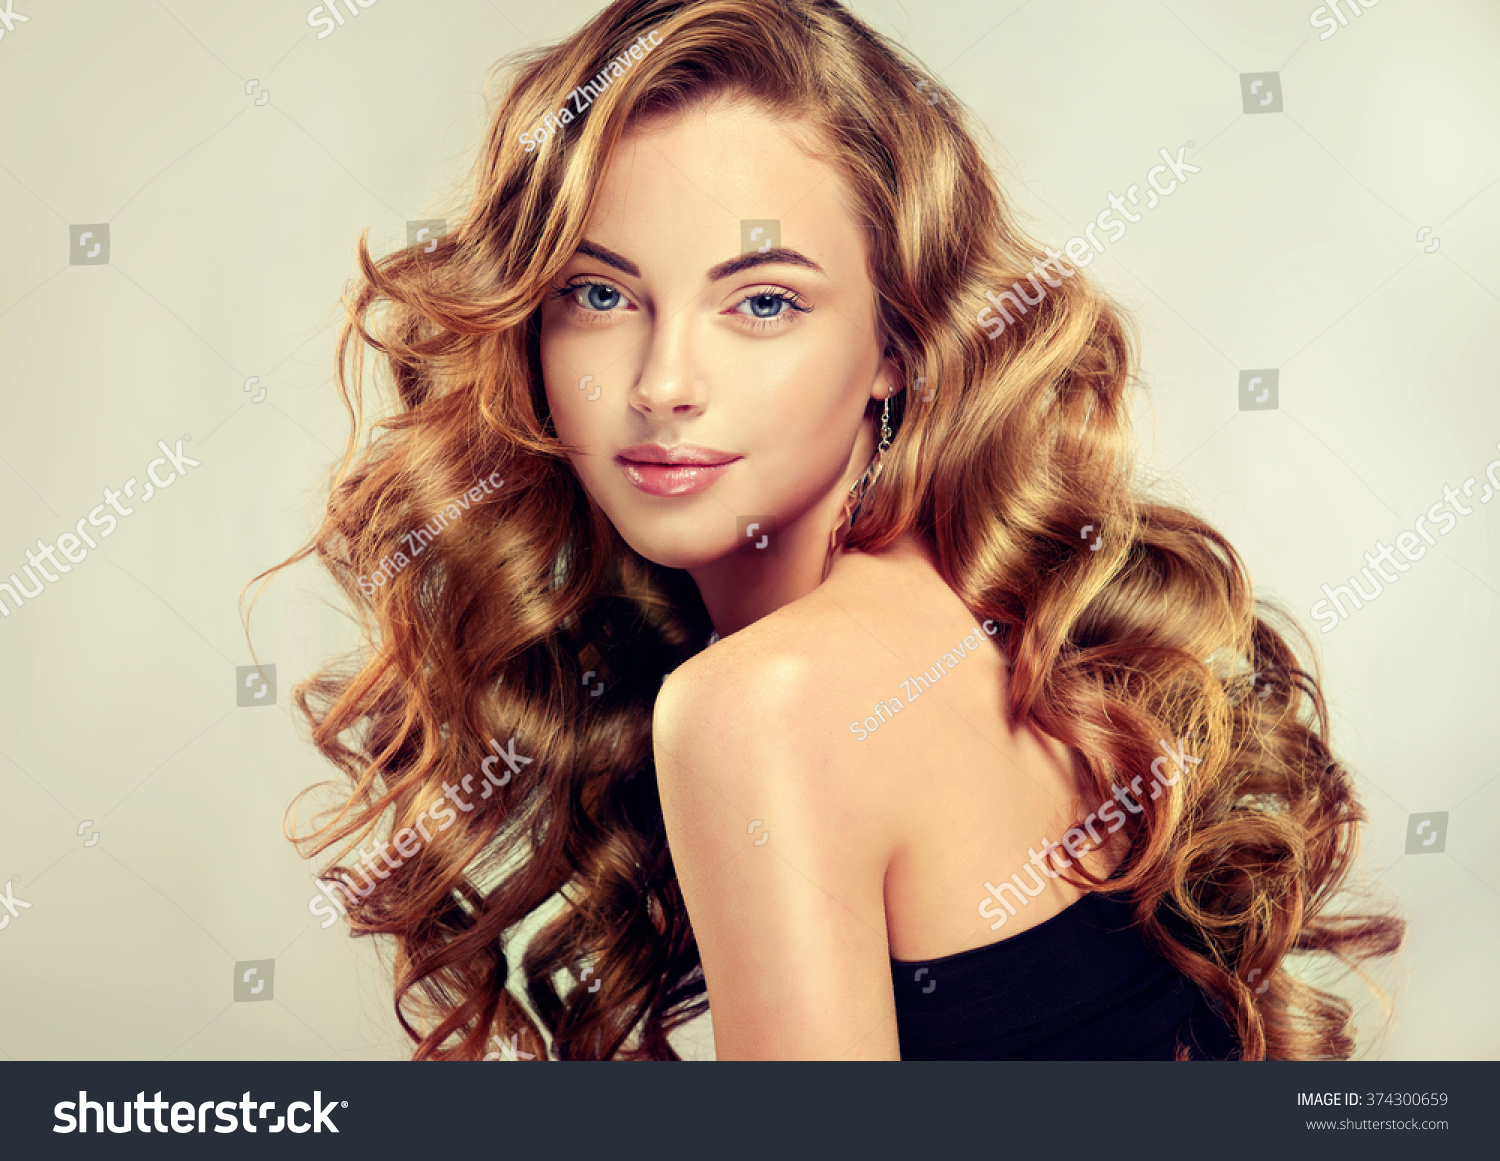 Beautiful Girl With Long Wavy Hair Brunette With Curly Hairstyle 4382